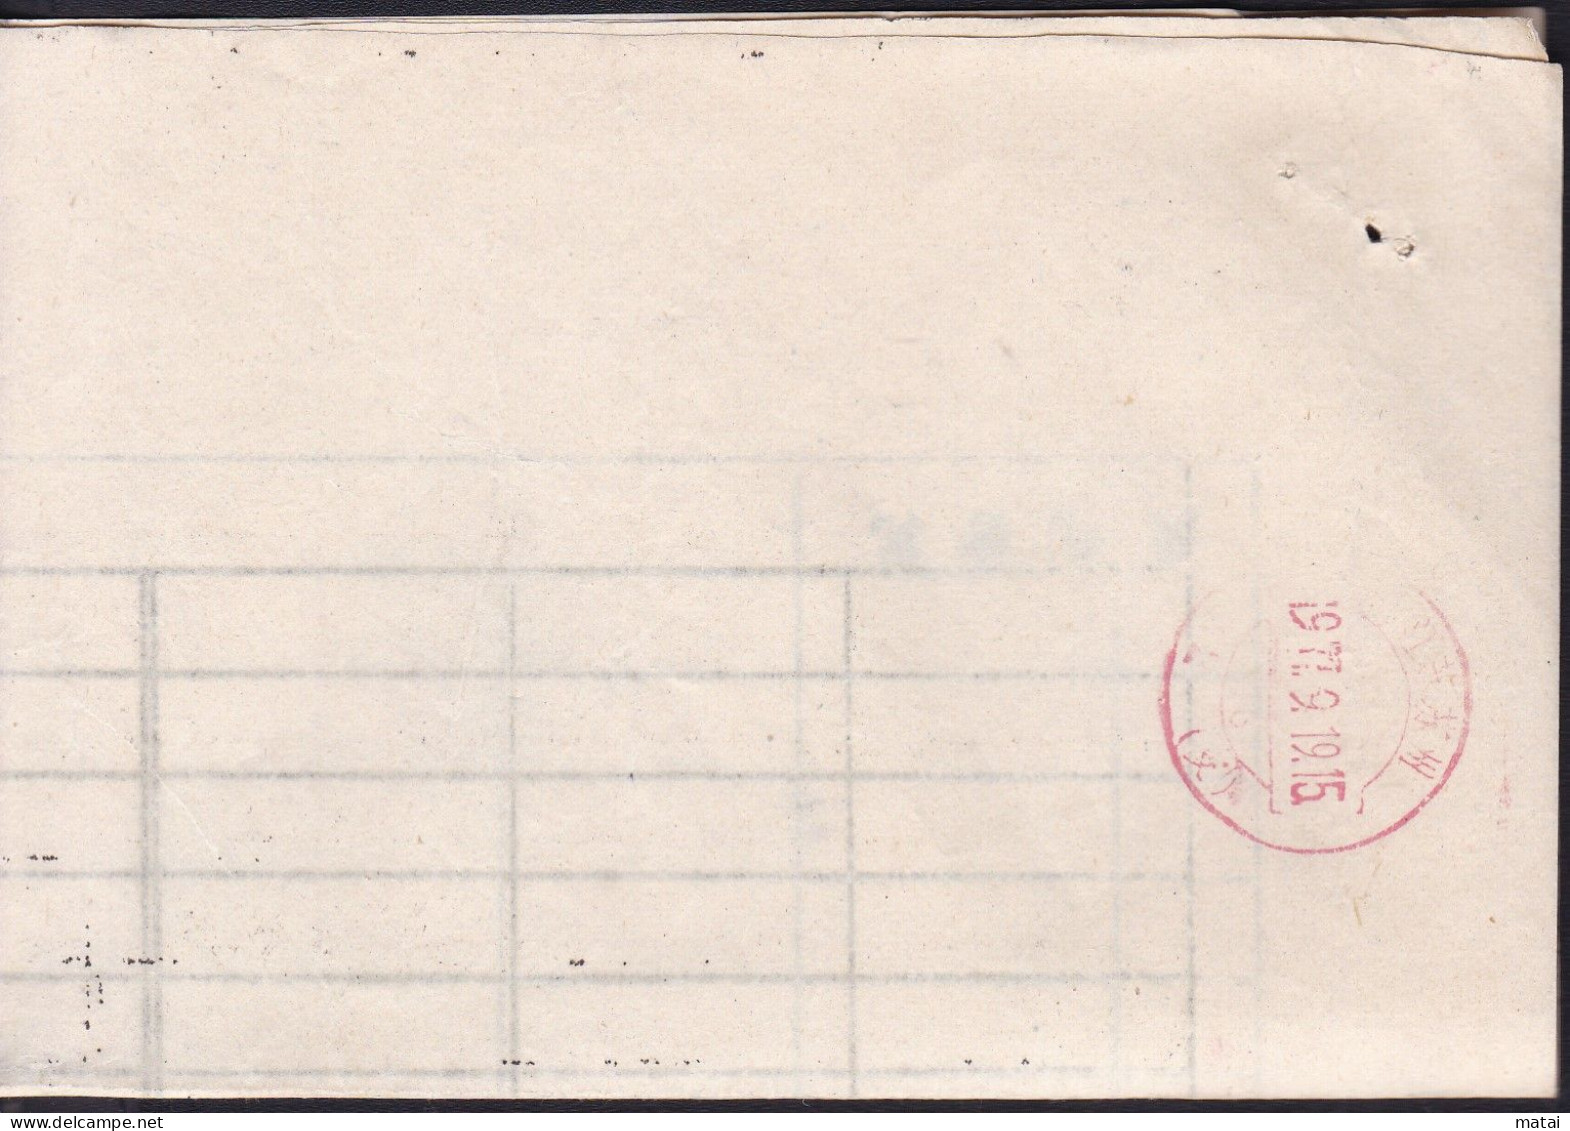 CHINA CHINE 1971 SUZHOU TO SUZHOU Seismological Bureau COVER Observation Records Of Water Wells WITH 1.5 F STAMP - Cartas & Documentos